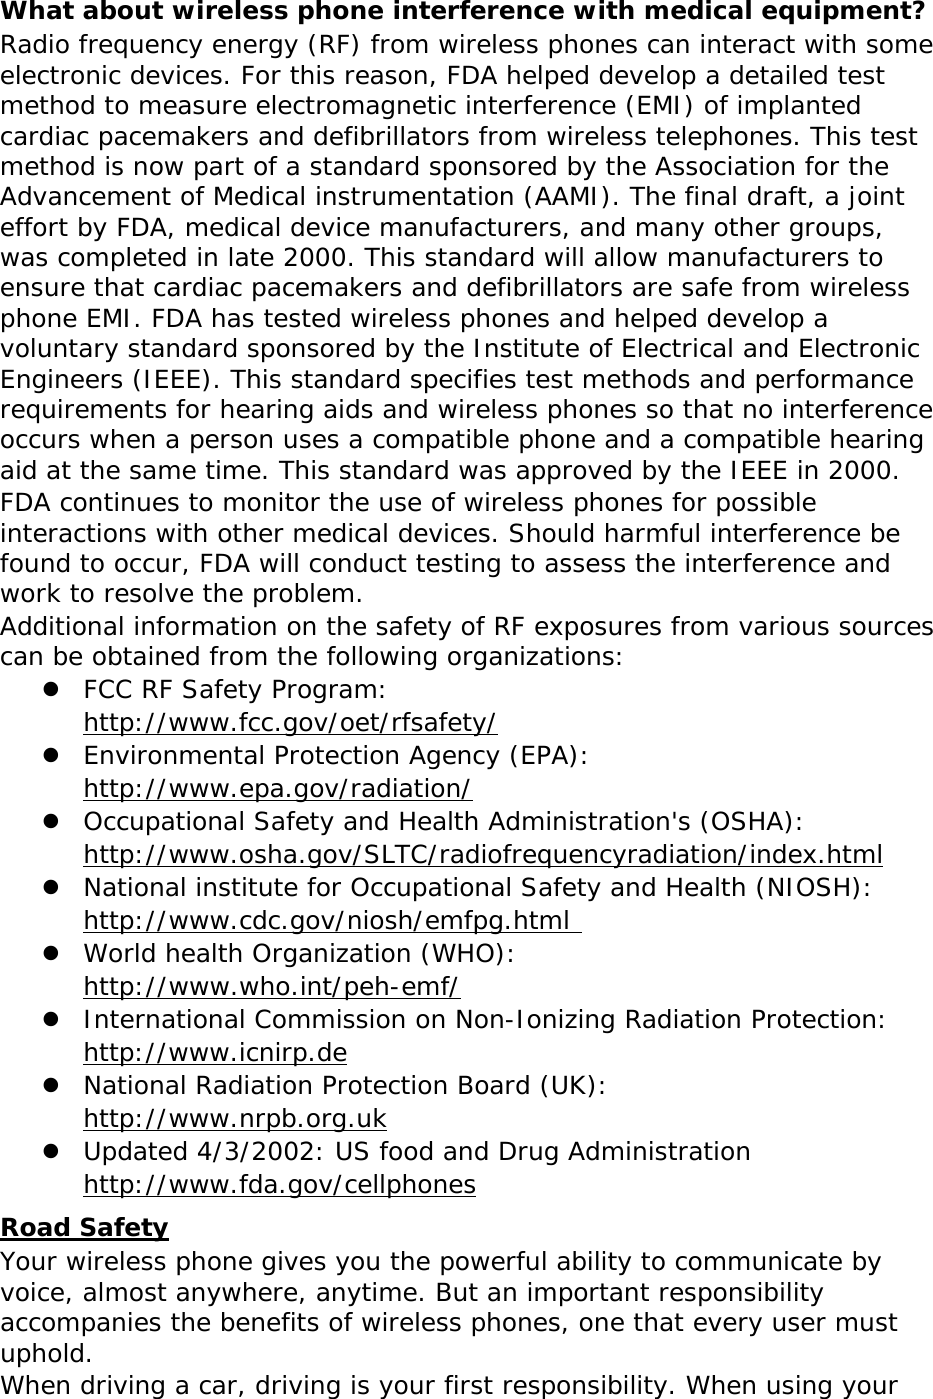 What about wireless phone interference with medical equipment? Radio frequency energy (RF) from wireless phones can interact with some electronic devices. For this reason, FDA helped develop a detailed test method to measure electromagnetic interference (EMI) of implanted cardiac pacemakers and defibrillators from wireless telephones. This test method is now part of a standard sponsored by the Association for the Advancement of Medical instrumentation (AAMI). The final draft, a joint effort by FDA, medical device manufacturers, and many other groups, was completed in late 2000. This standard will allow manufacturers to ensure that cardiac pacemakers and defibrillators are safe from wireless phone EMI. FDA has tested wireless phones and helped develop a voluntary standard sponsored by the Institute of Electrical and Electronic Engineers (IEEE). This standard specifies test methods and performance requirements for hearing aids and wireless phones so that no interference occurs when a person uses a compatible phone and a compatible hearing aid at the same time. This standard was approved by the IEEE in 2000. FDA continues to monitor the use of wireless phones for possible interactions with other medical devices. Should harmful interference be found to occur, FDA will conduct testing to assess the interference and work to resolve the problem. Additional information on the safety of RF exposures from various sources can be obtained from the following organizations: z FCC RF Safety Program:  http://www.fcc.gov/oet/rfsafety/ z Environmental Protection Agency (EPA):  http://www.epa.gov/radiation/ z Occupational Safety and Health Administration&apos;s (OSHA):        http://www.osha.gov/SLTC/radiofrequencyradiation/index.html z National institute for Occupational Safety and Health (NIOSH):  http://www.cdc.gov/niosh/emfpg.html  z World health Organization (WHO):  http://www.who.int/peh-emf/ z International Commission on Non-Ionizing Radiation Protection:  http://www.icnirp.de z National Radiation Protection Board (UK):  http://www.nrpb.org.uk z Updated 4/3/2002: US food and Drug Administration  http://www.fda.gov/cellphones Road Safety Your wireless phone gives you the powerful ability to communicate by voice, almost anywhere, anytime. But an important responsibility accompanies the benefits of wireless phones, one that every user must uphold. When driving a car, driving is your first responsibility. When using your 